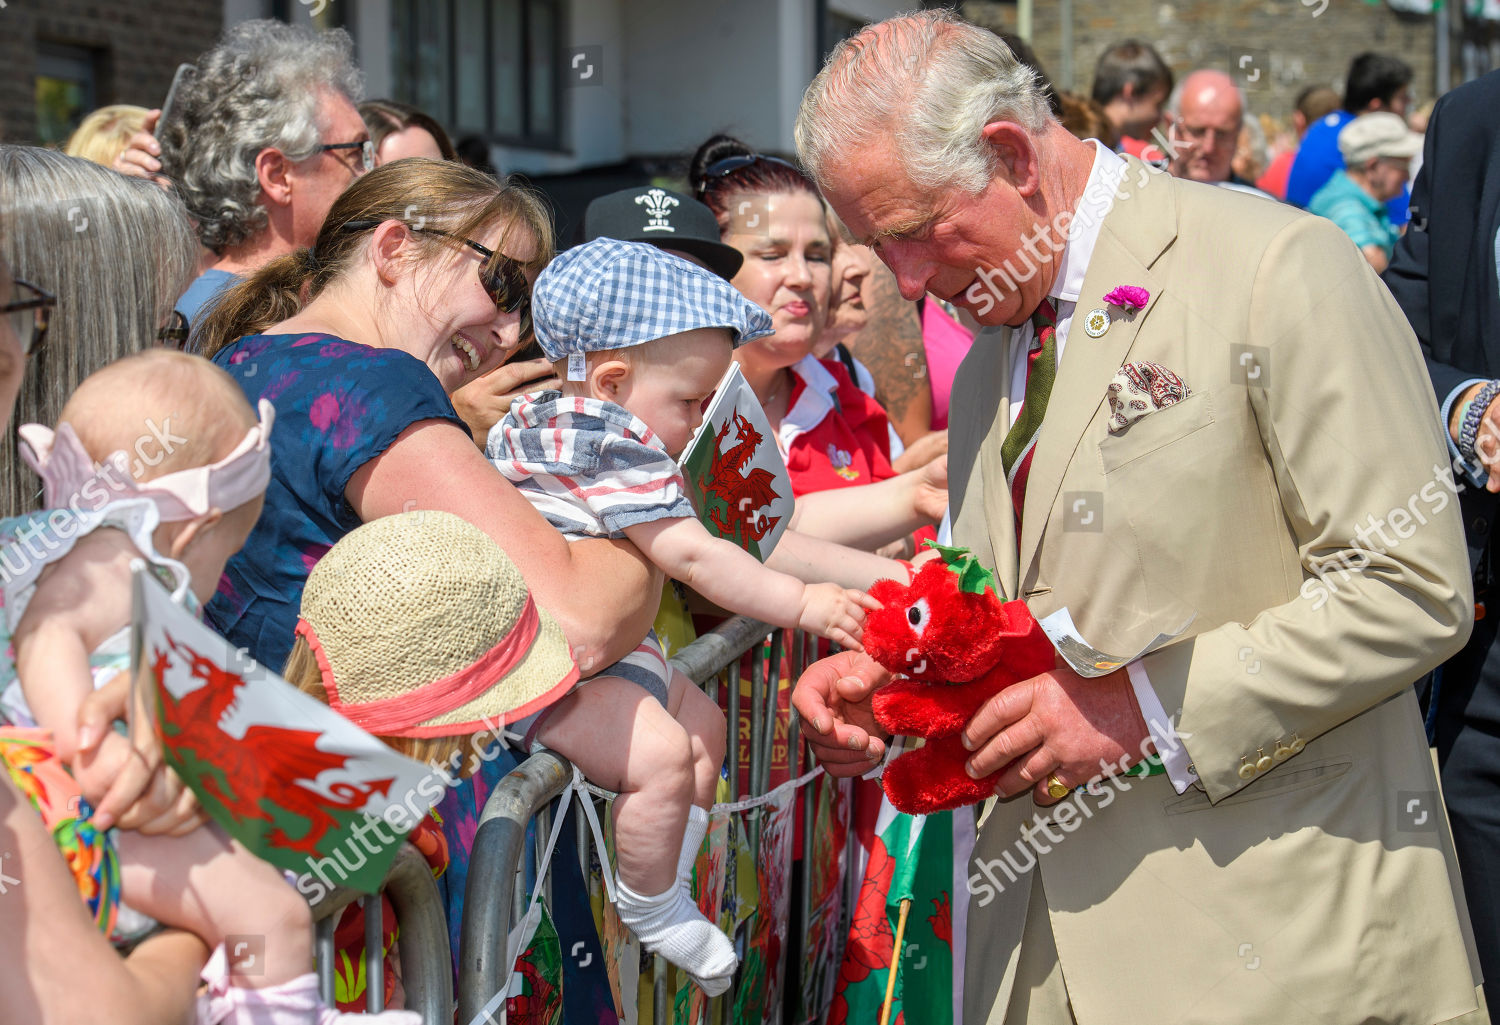 prince-charles-and-camilla-duchess-of-cornwall-visit-to-wales-uk-shutterstock-editorial-10327726ax.jpg